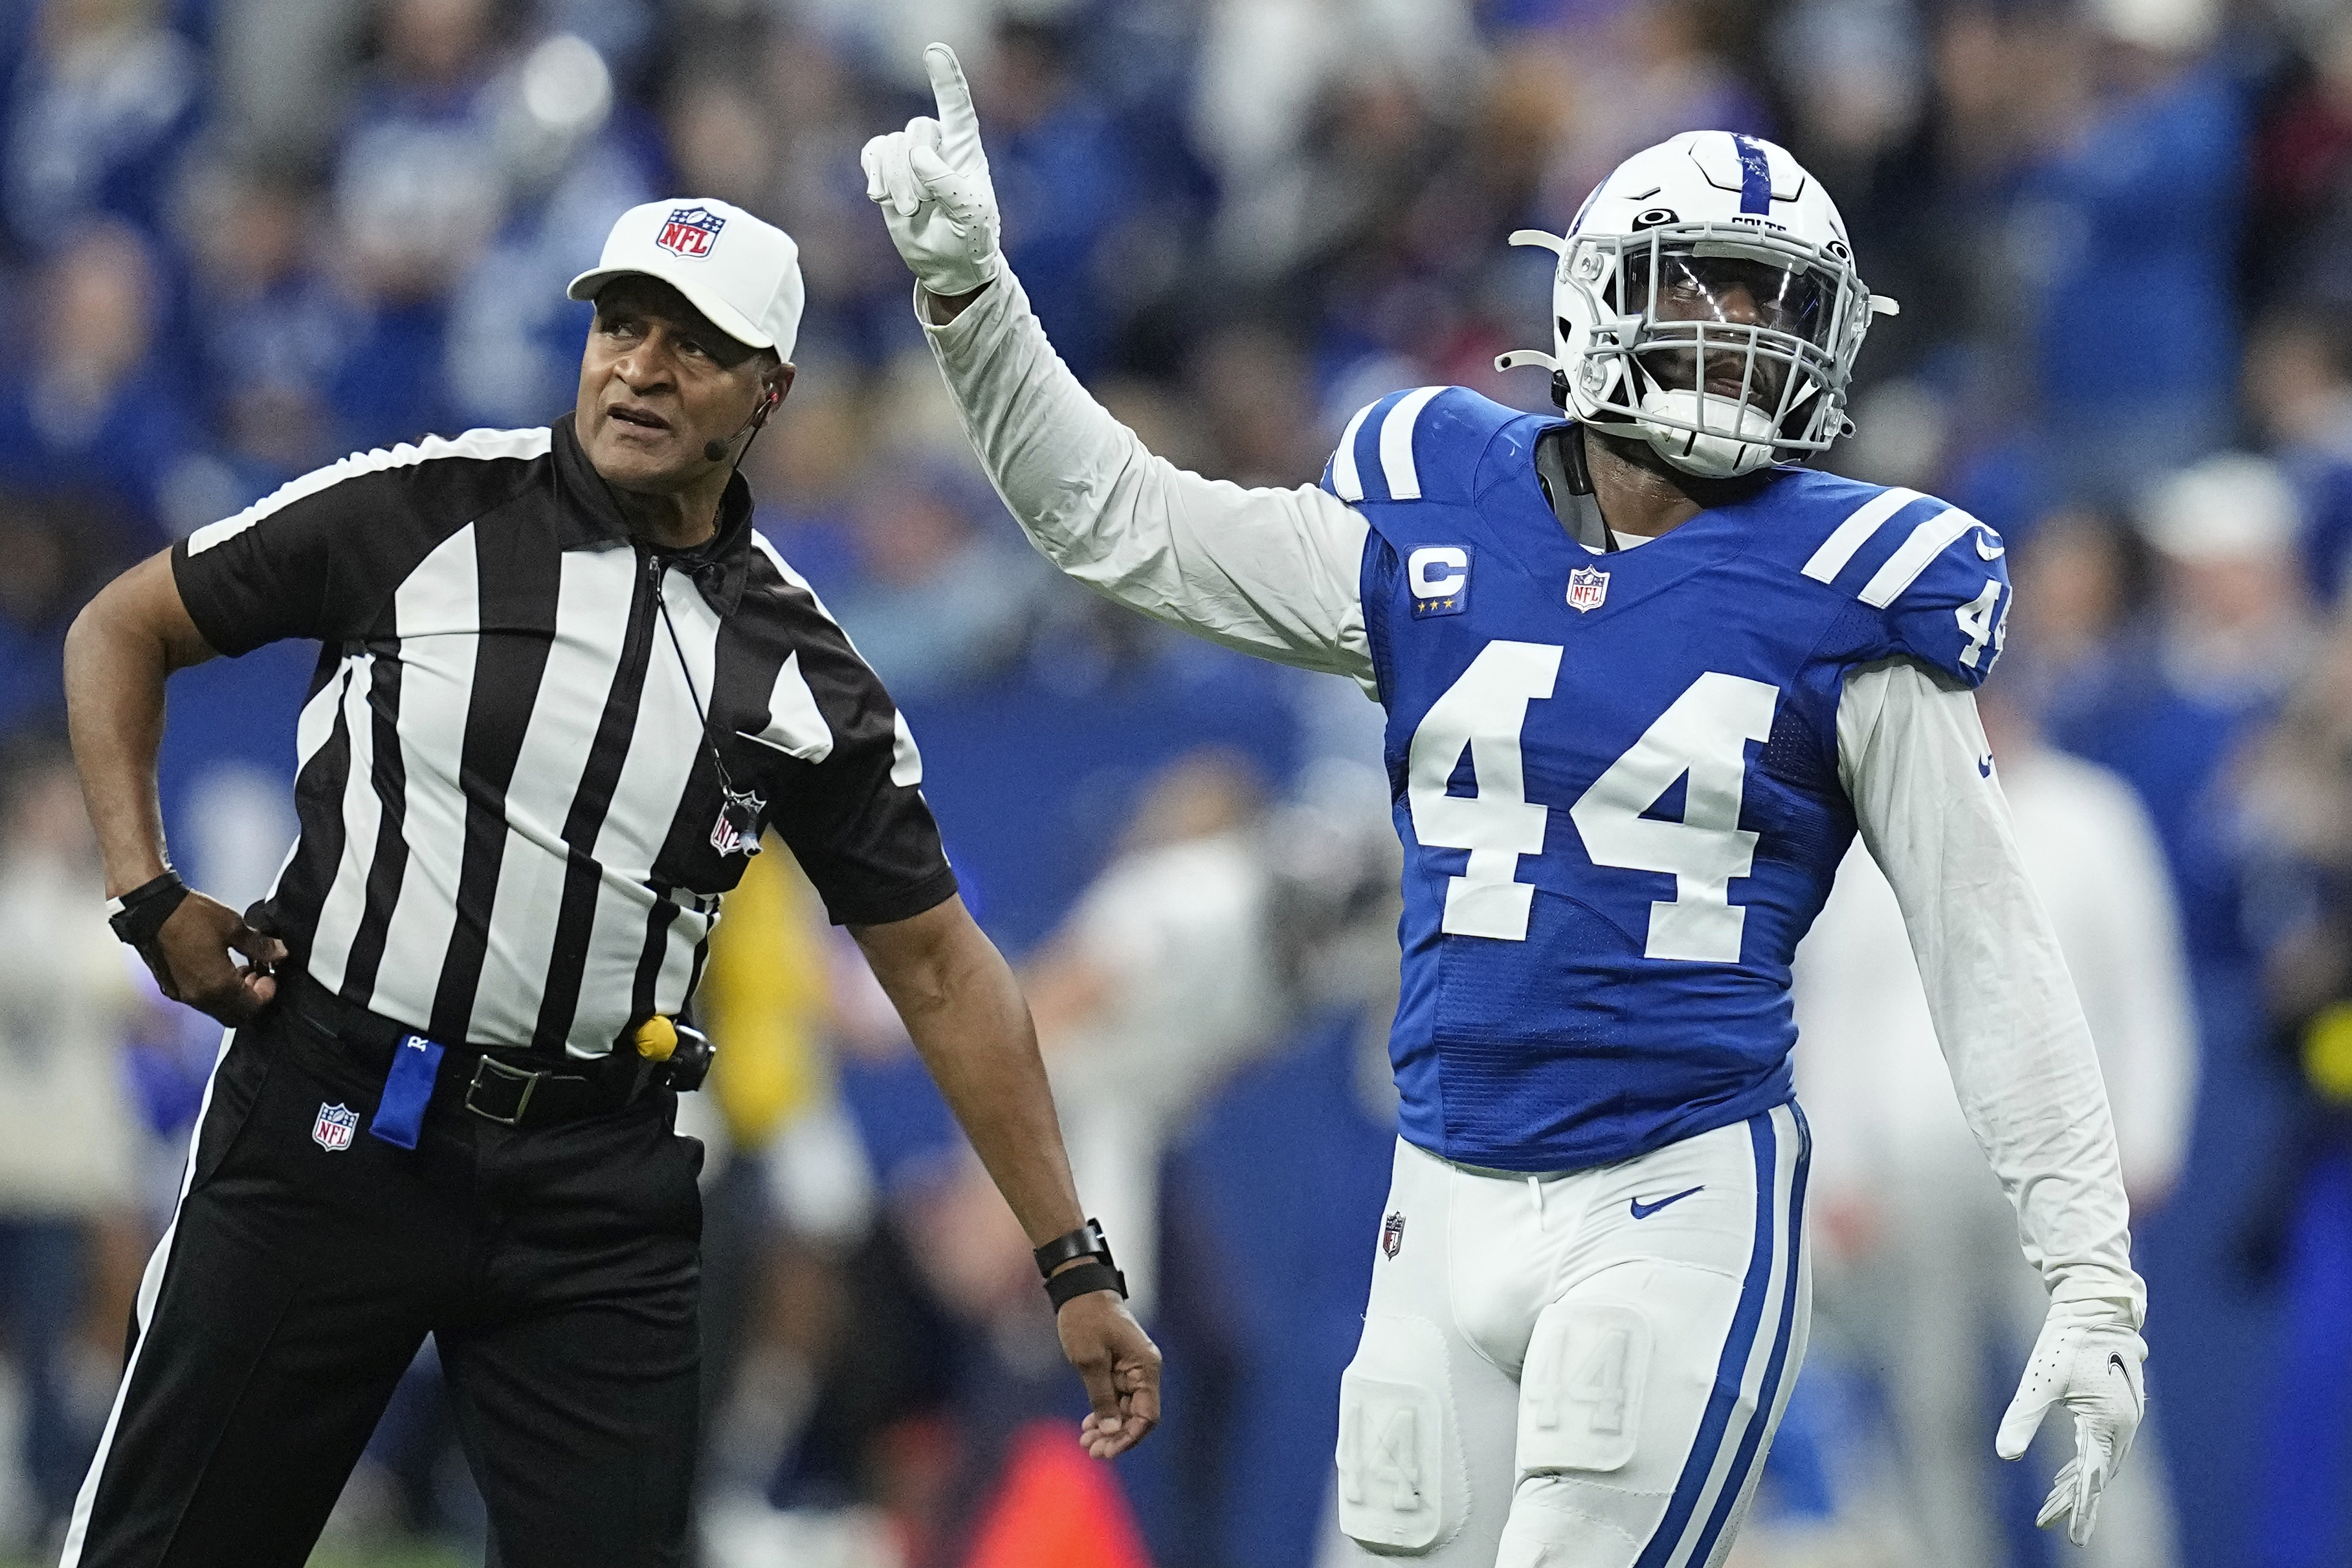 Zaire Franklin breaks Colts record; 3 Syracuse alumni in playoffs